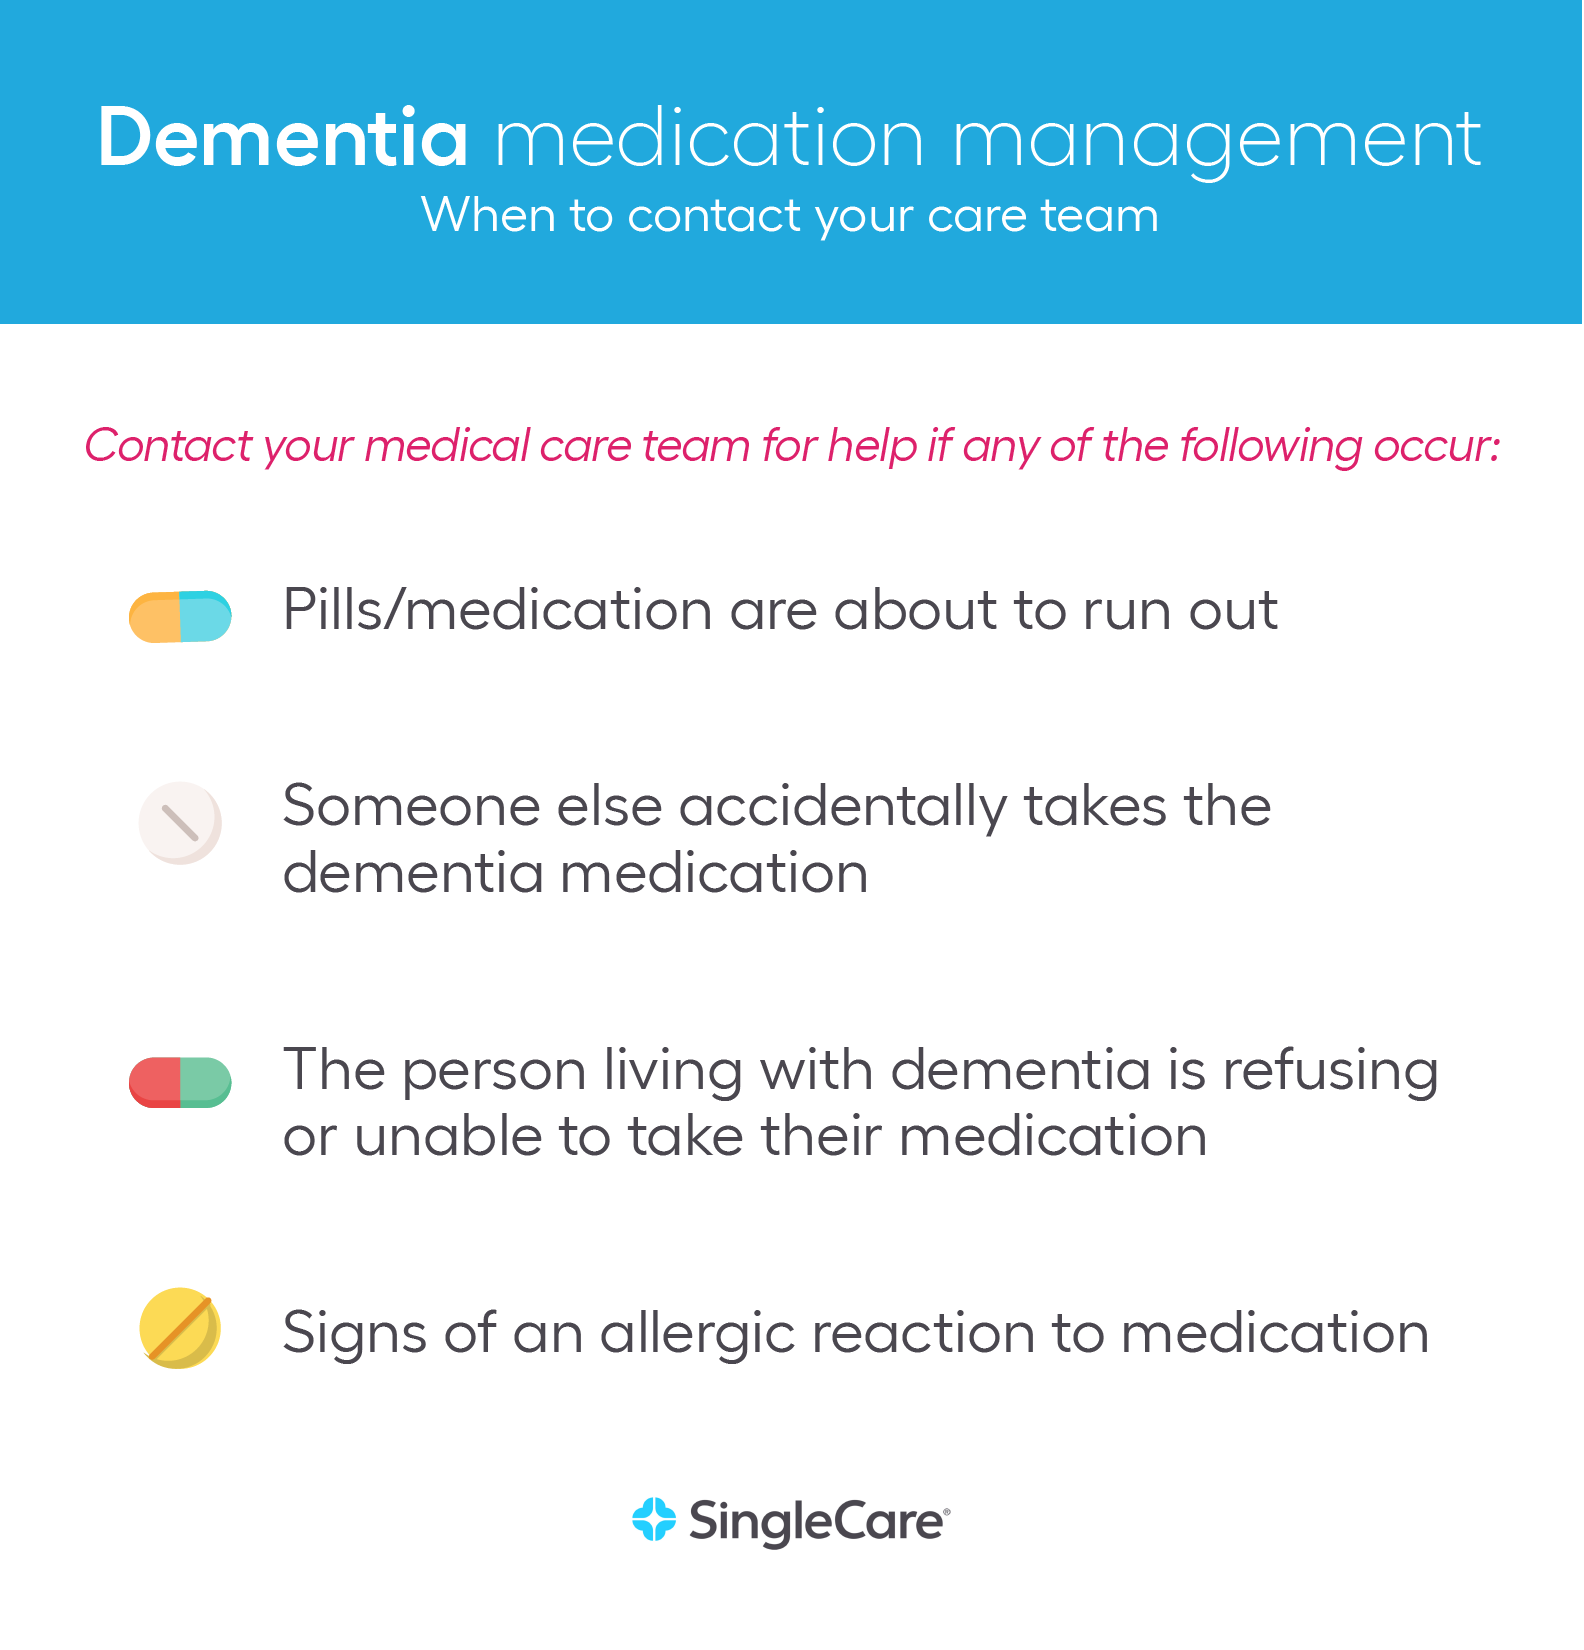 Dementia medication management - when to call the care team